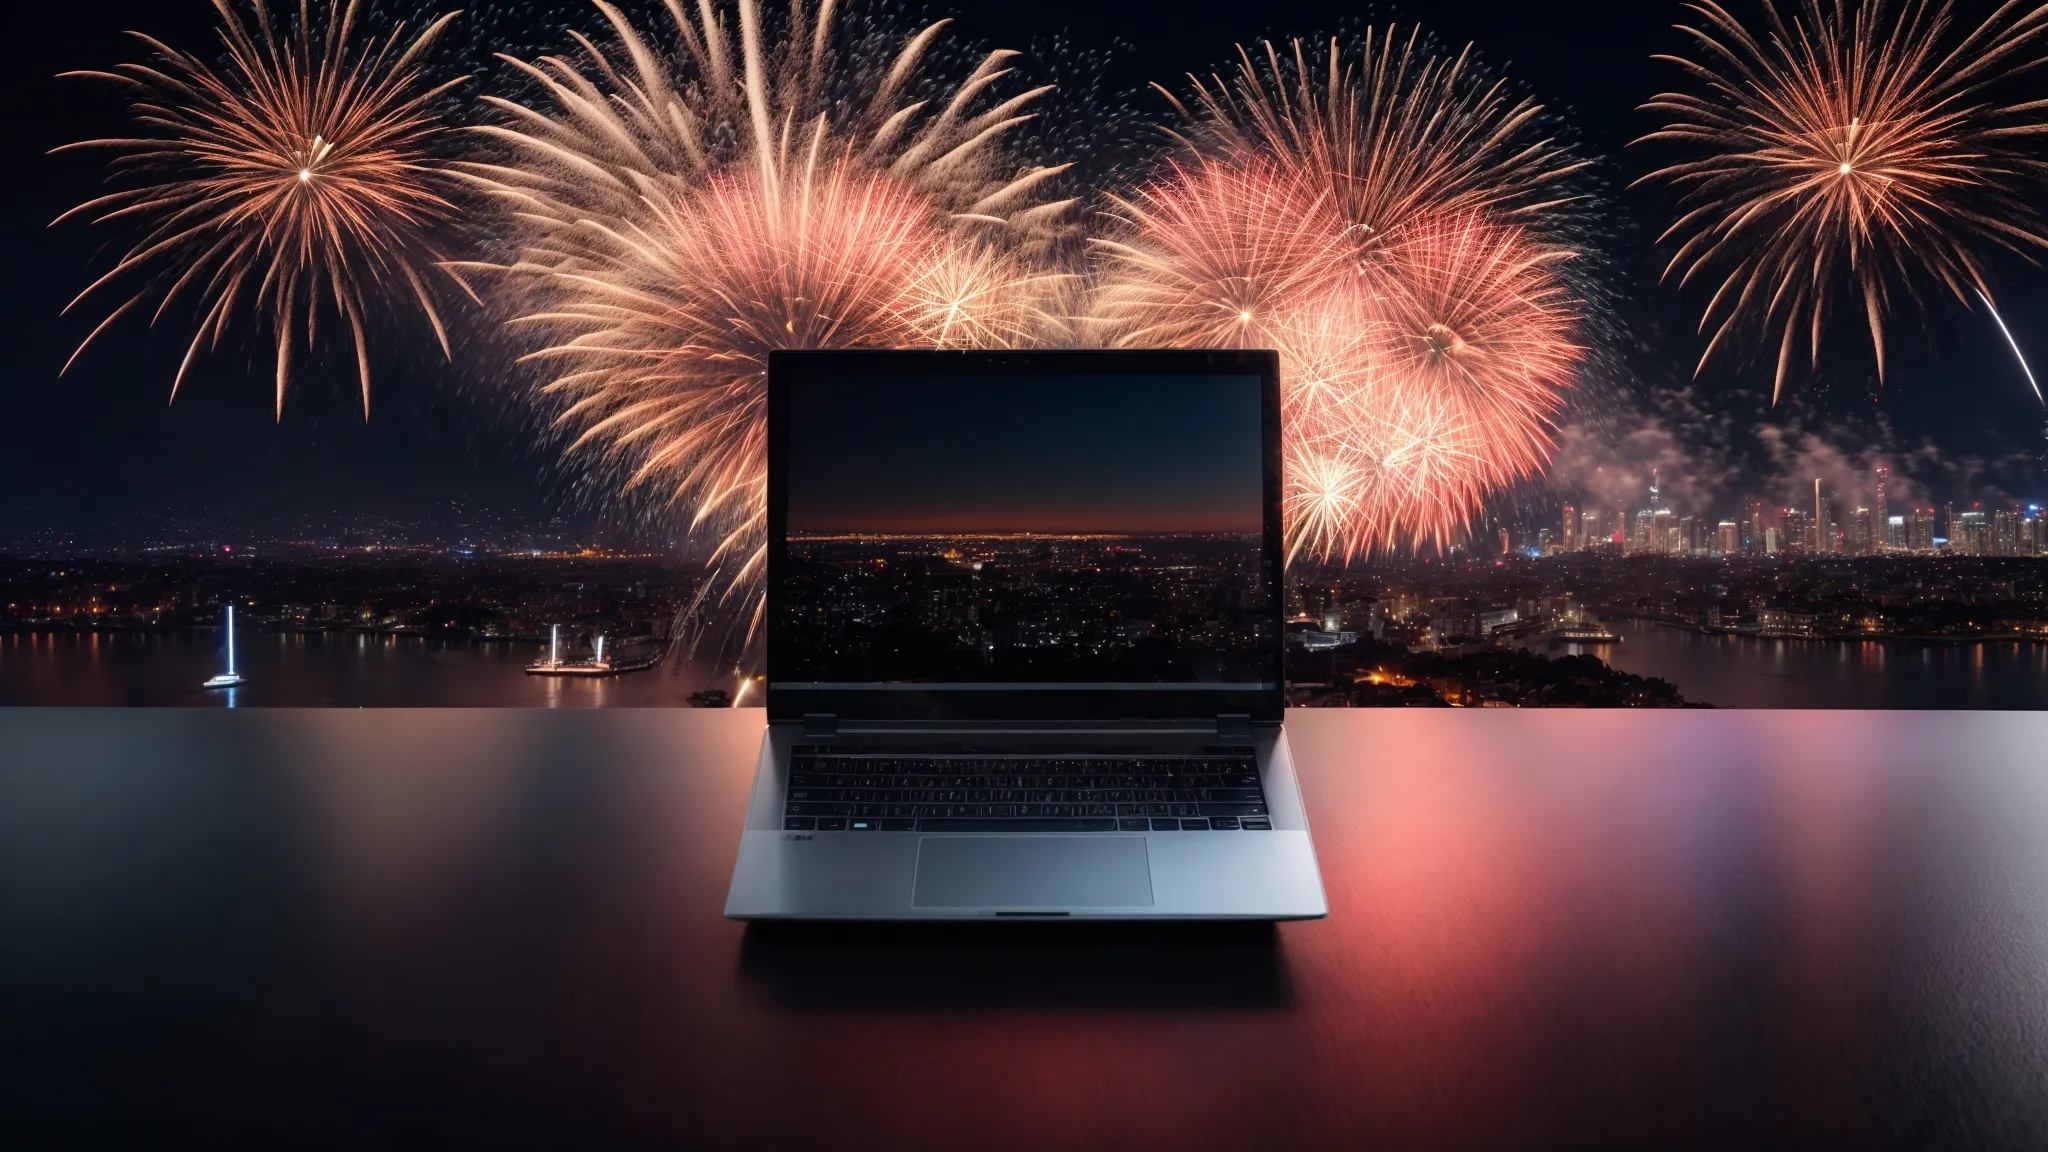 a sleek laptop open with a celebratory backdrop of fireworks illuminating the sky to welcome the new year.